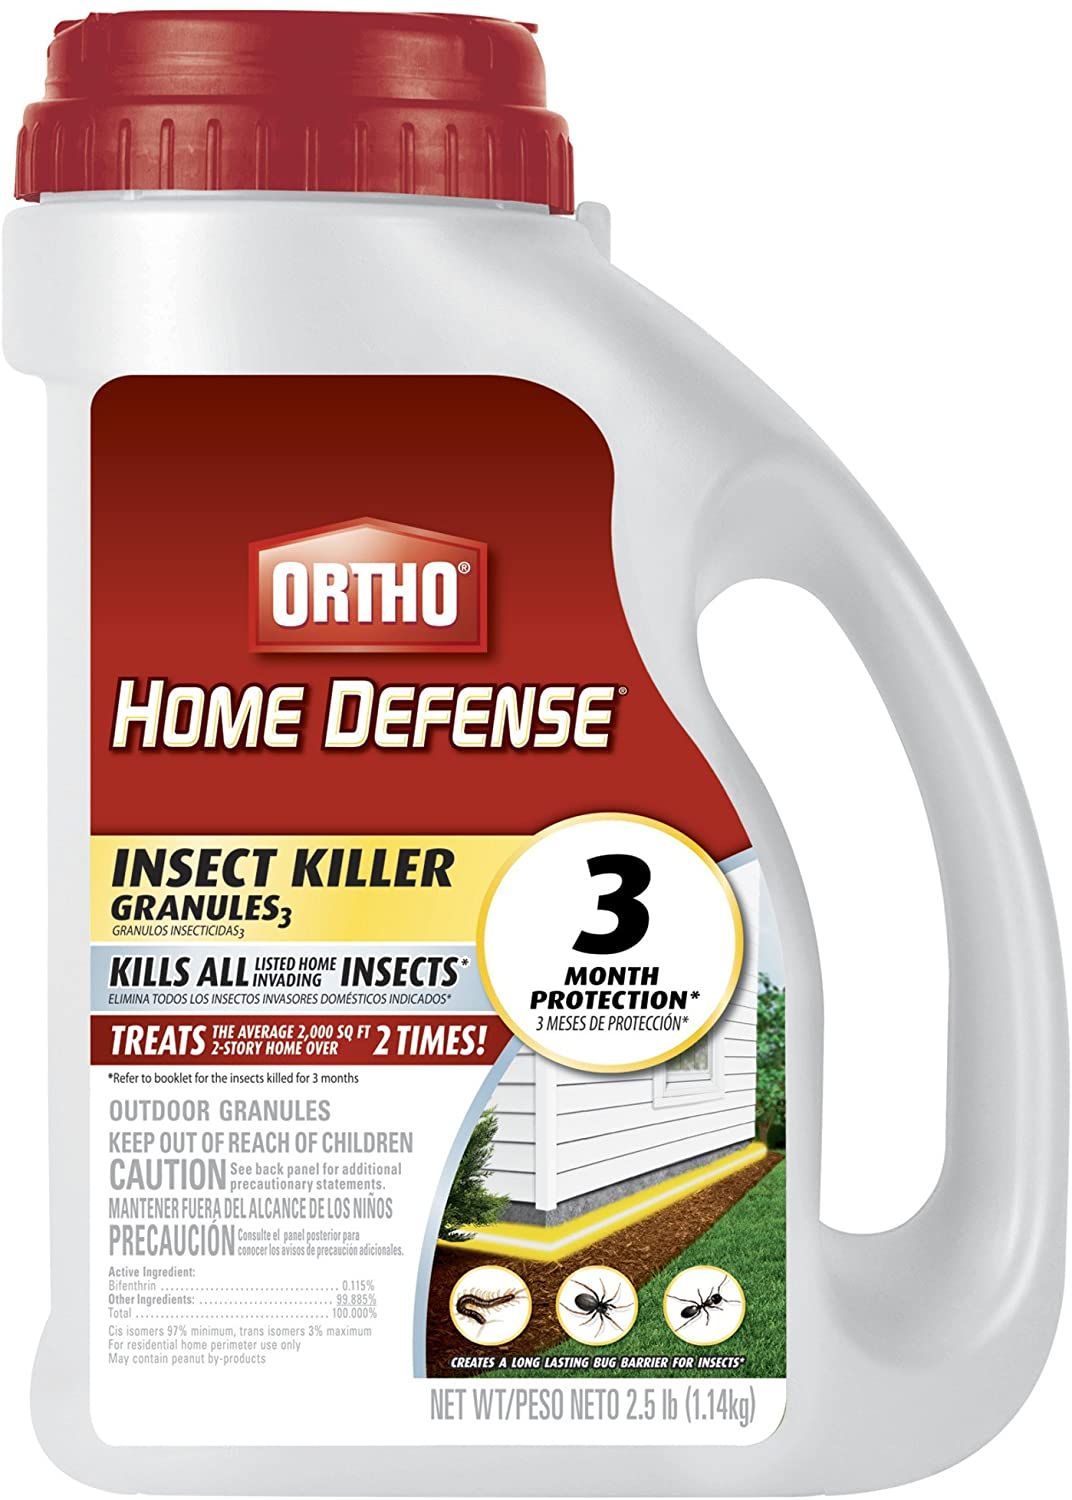 Ortho Home Defense Insect Killer Granules - $$title$$